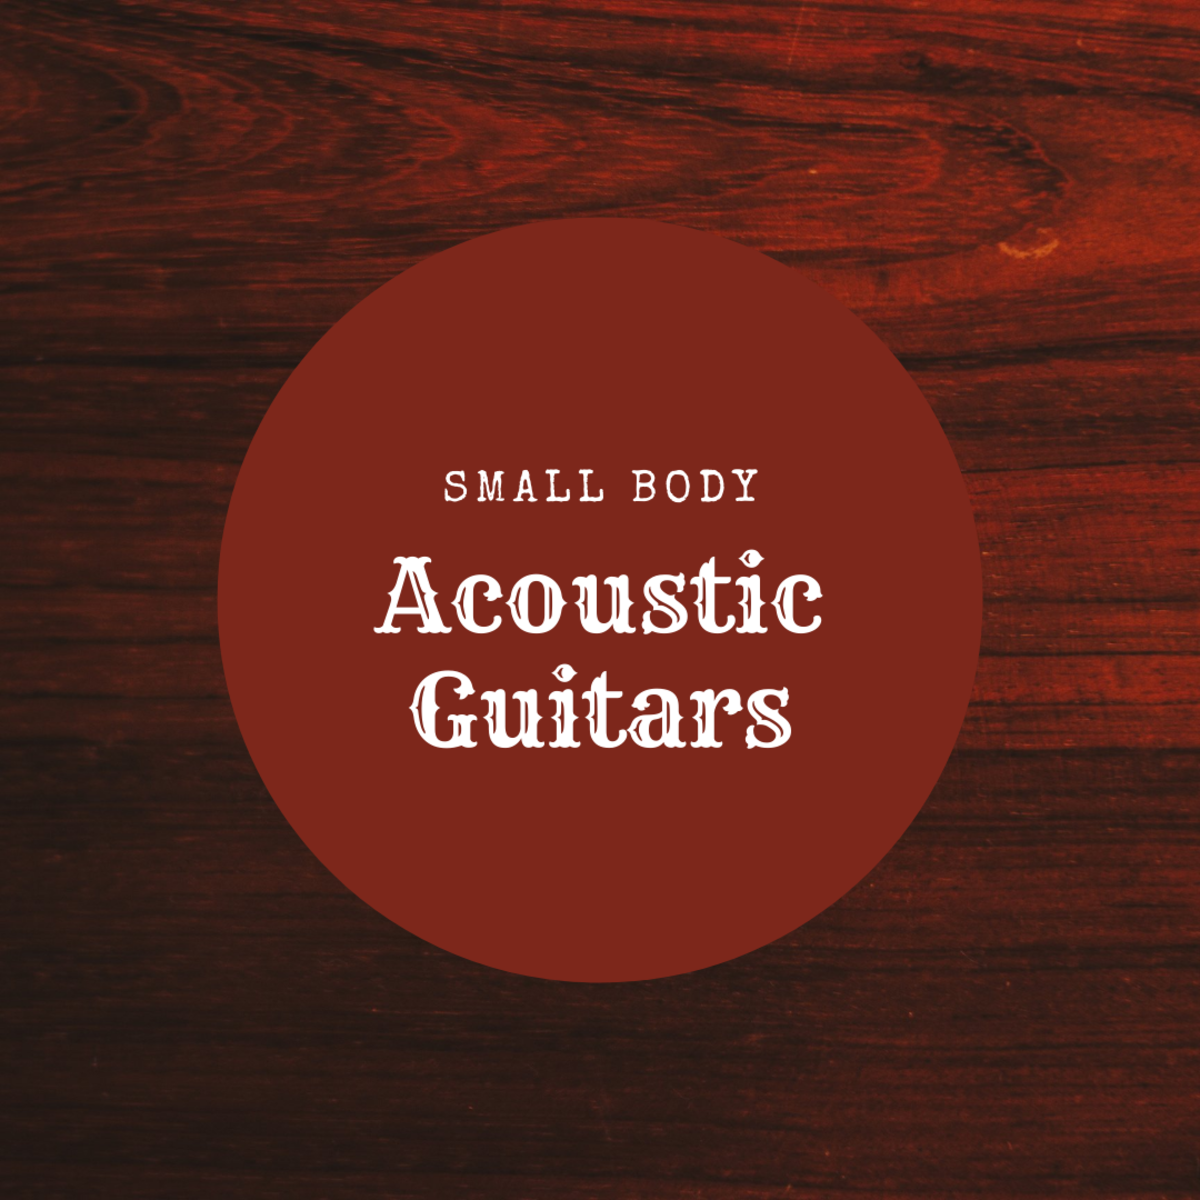 Small body acoustic guitars for serious amateurs or professionals